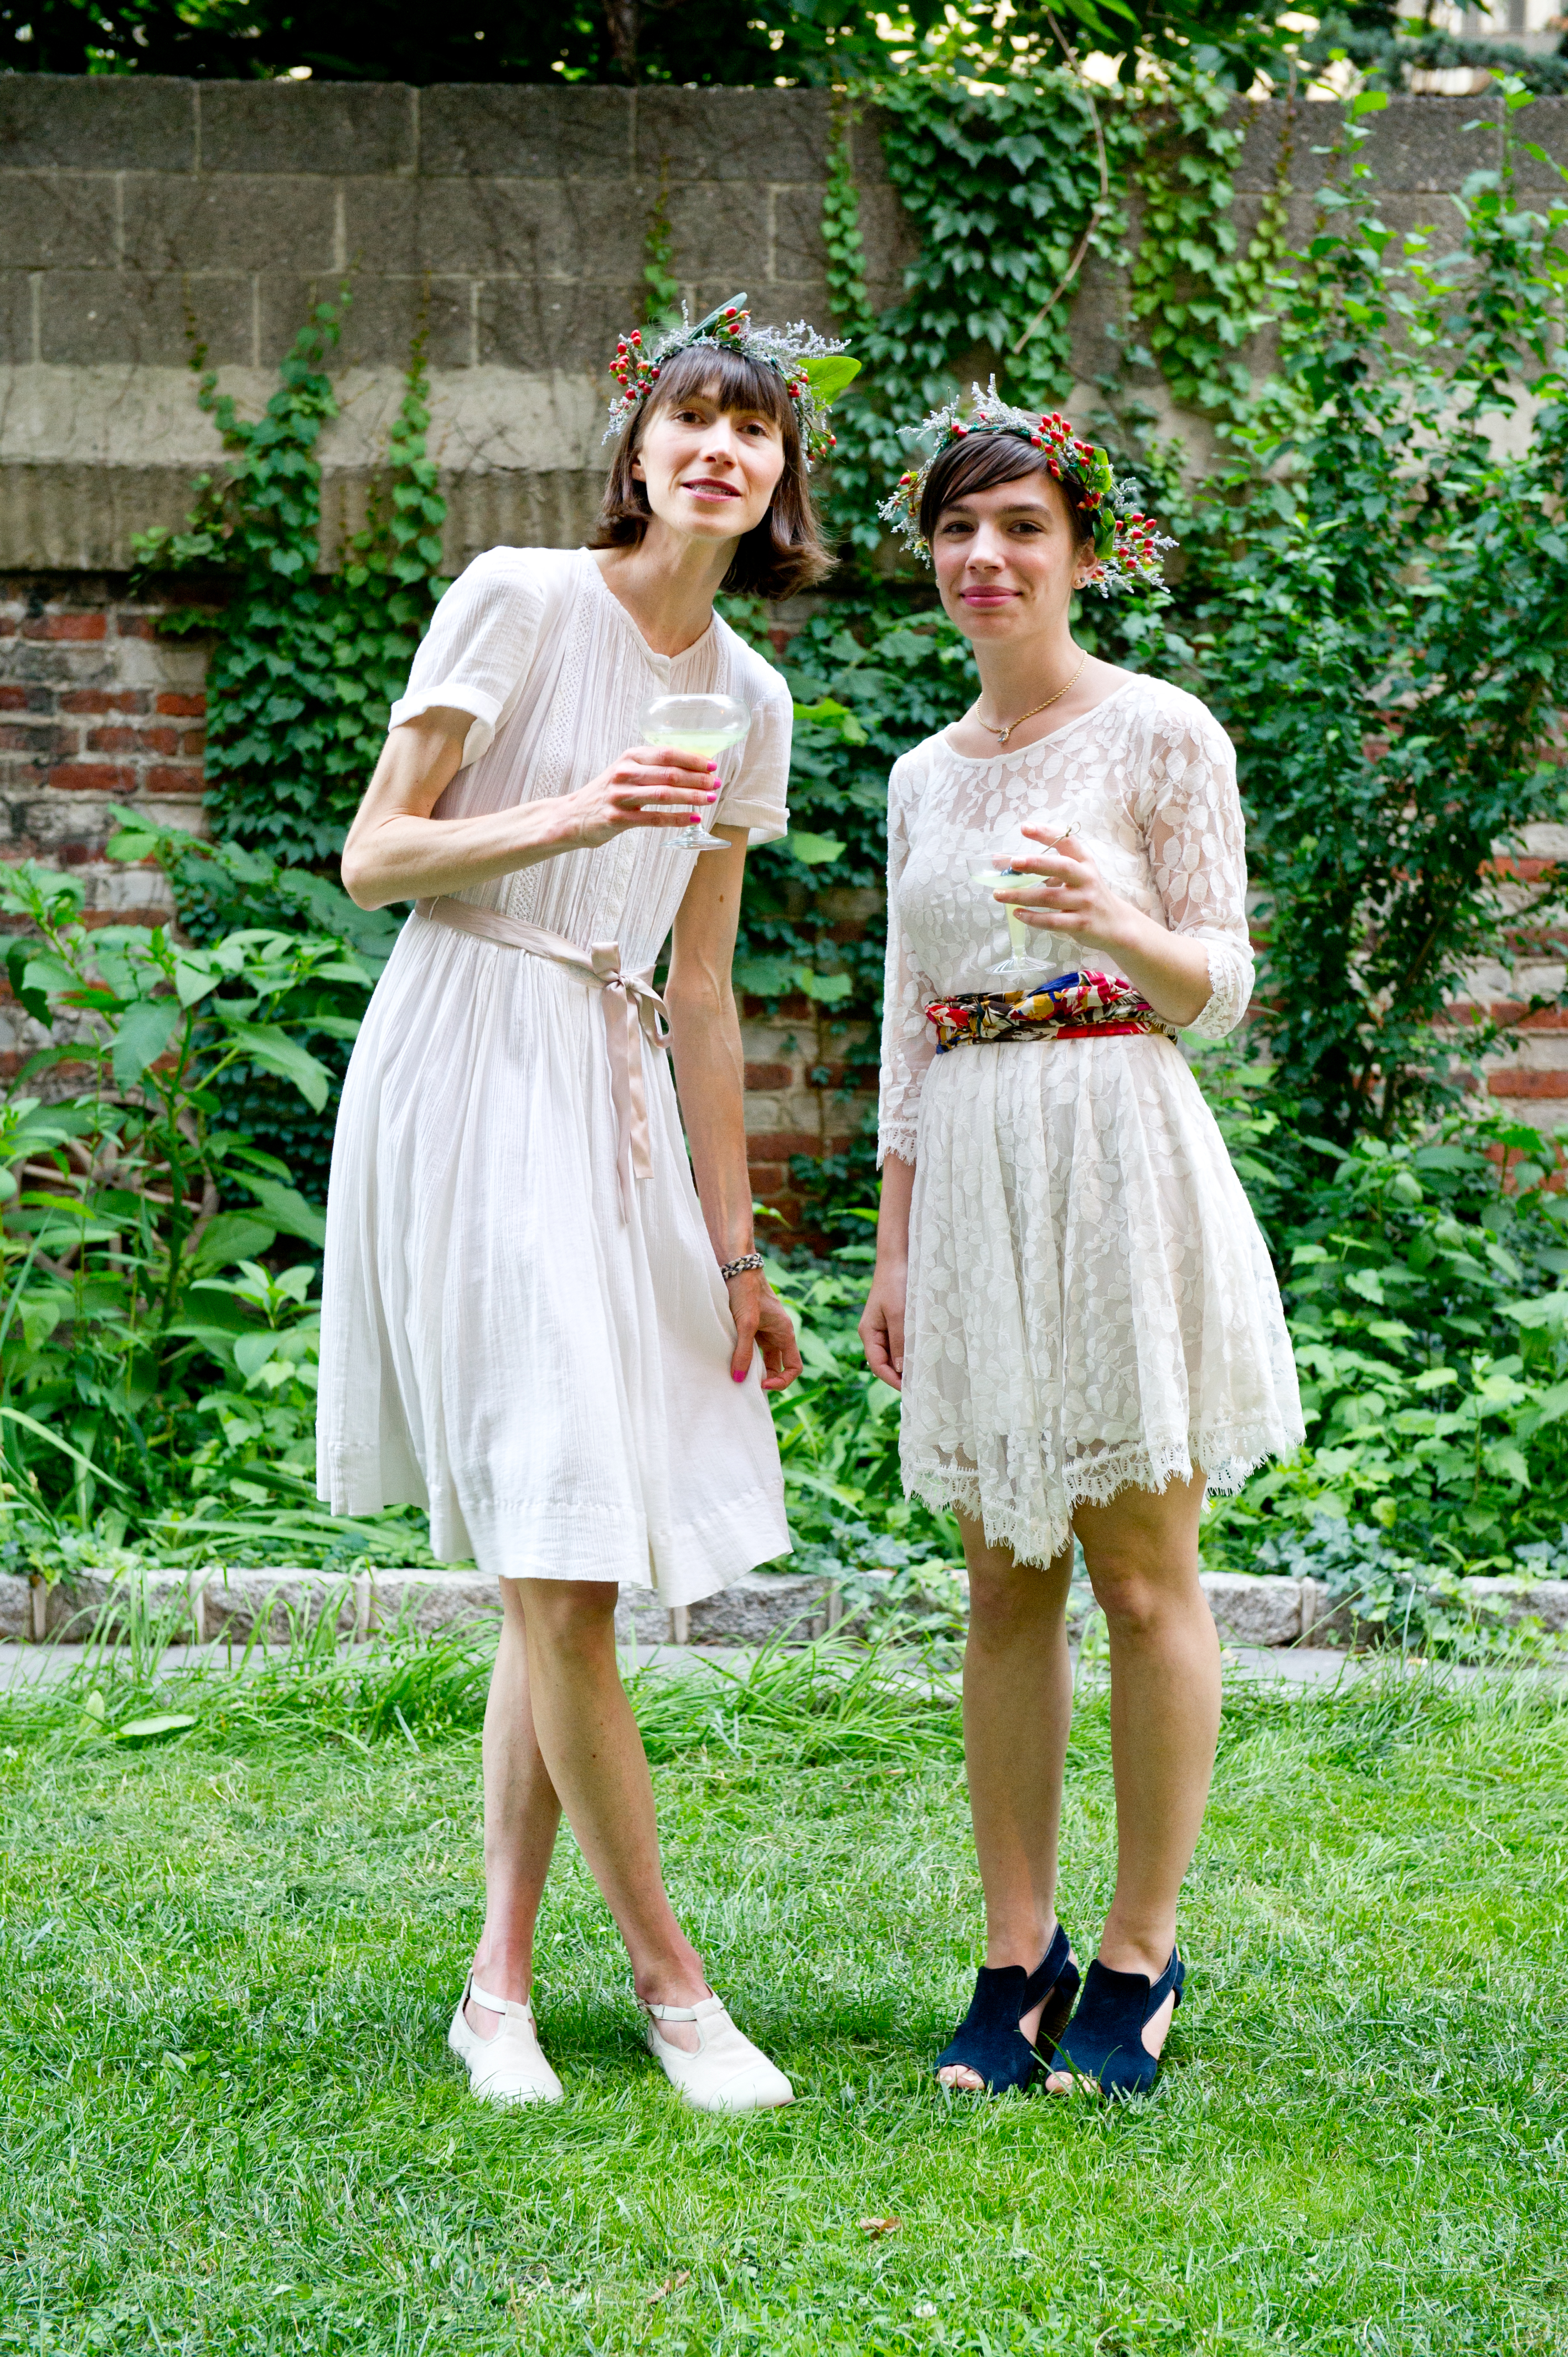 NYC Food Photographer - Summer Party Girls